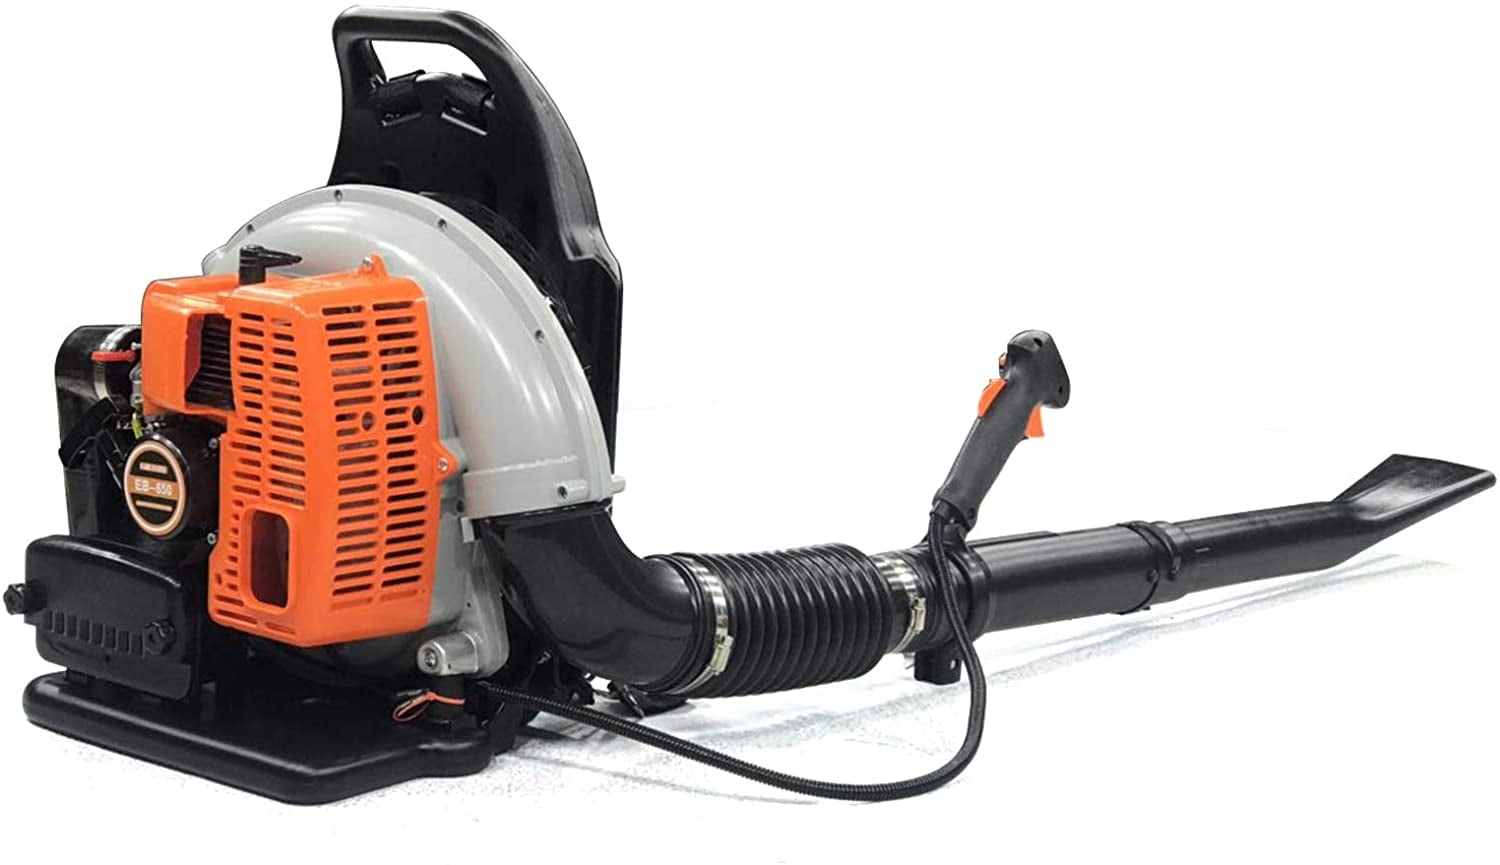 for Yard Cleaning Lawn Care Leaf Blower #B 3HP 2-Cycle Engine Back Pack Leaf Blower,63cc Gas Powered Cordless Leaf Blower,196 Mph Air Speed 3Hp Gas Powered Backpack Leaf Blower 